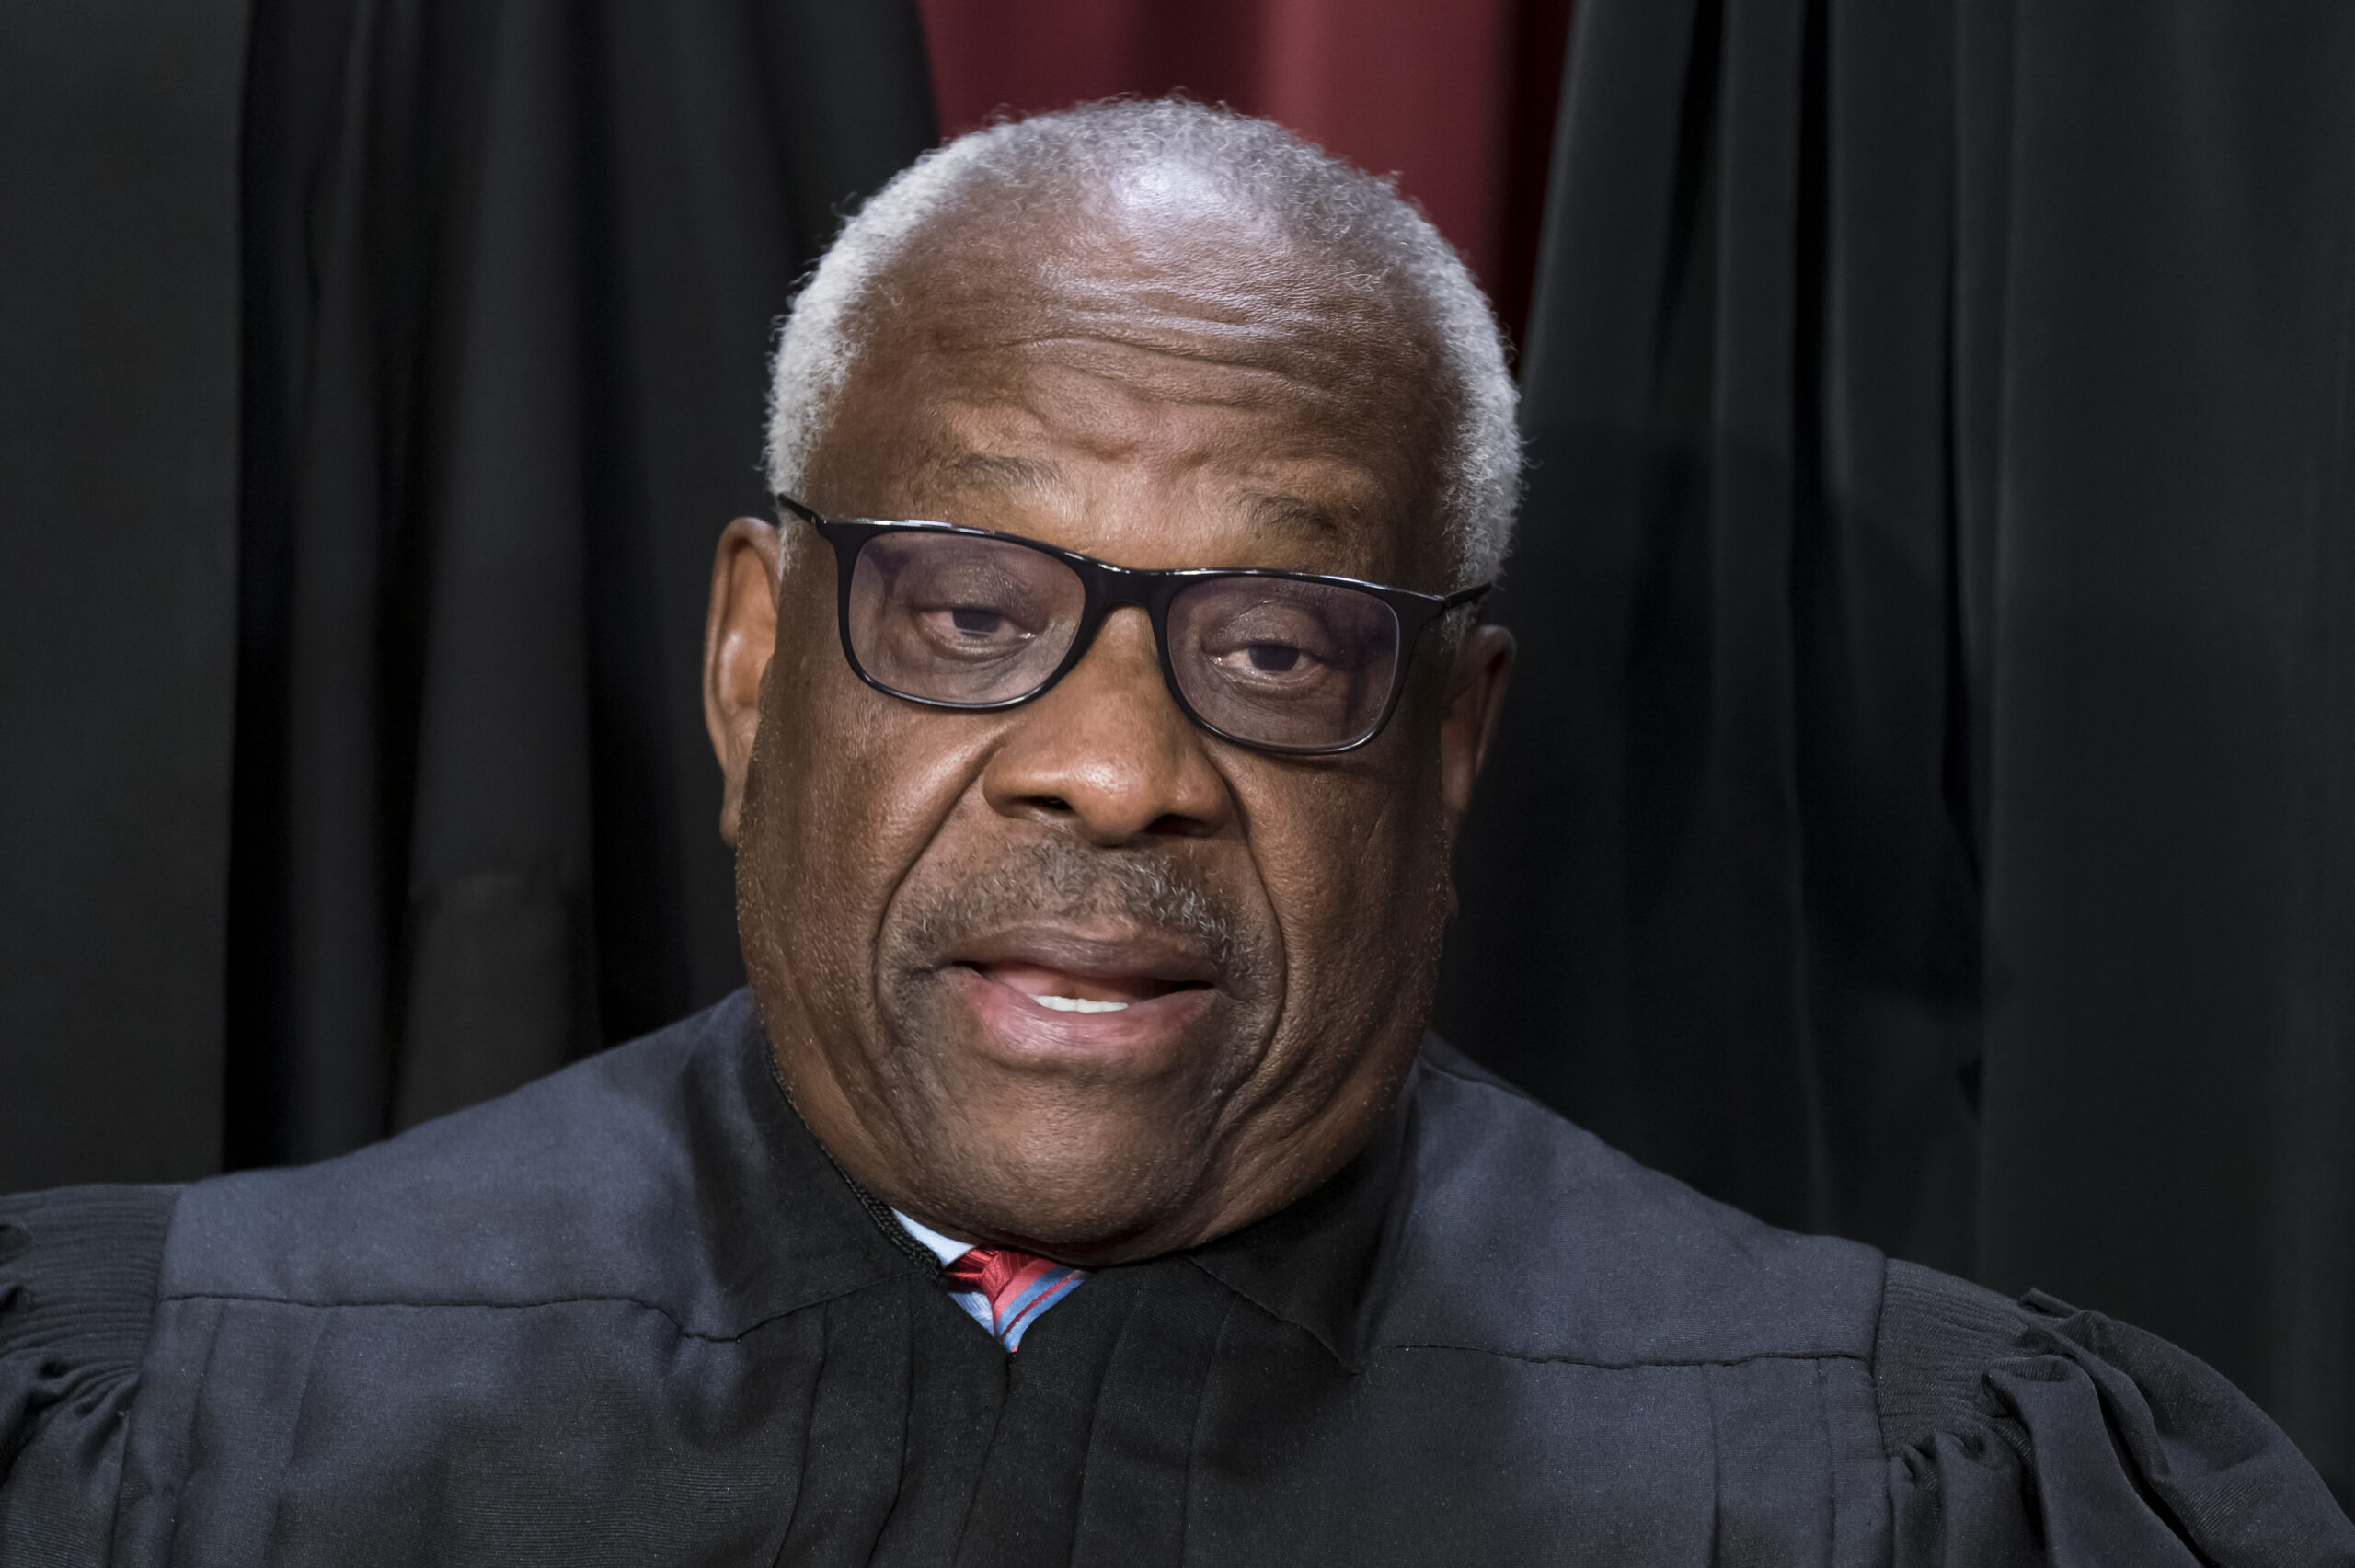 Justice Thomas decries ‘nastiness’ and ‘lies’ against him